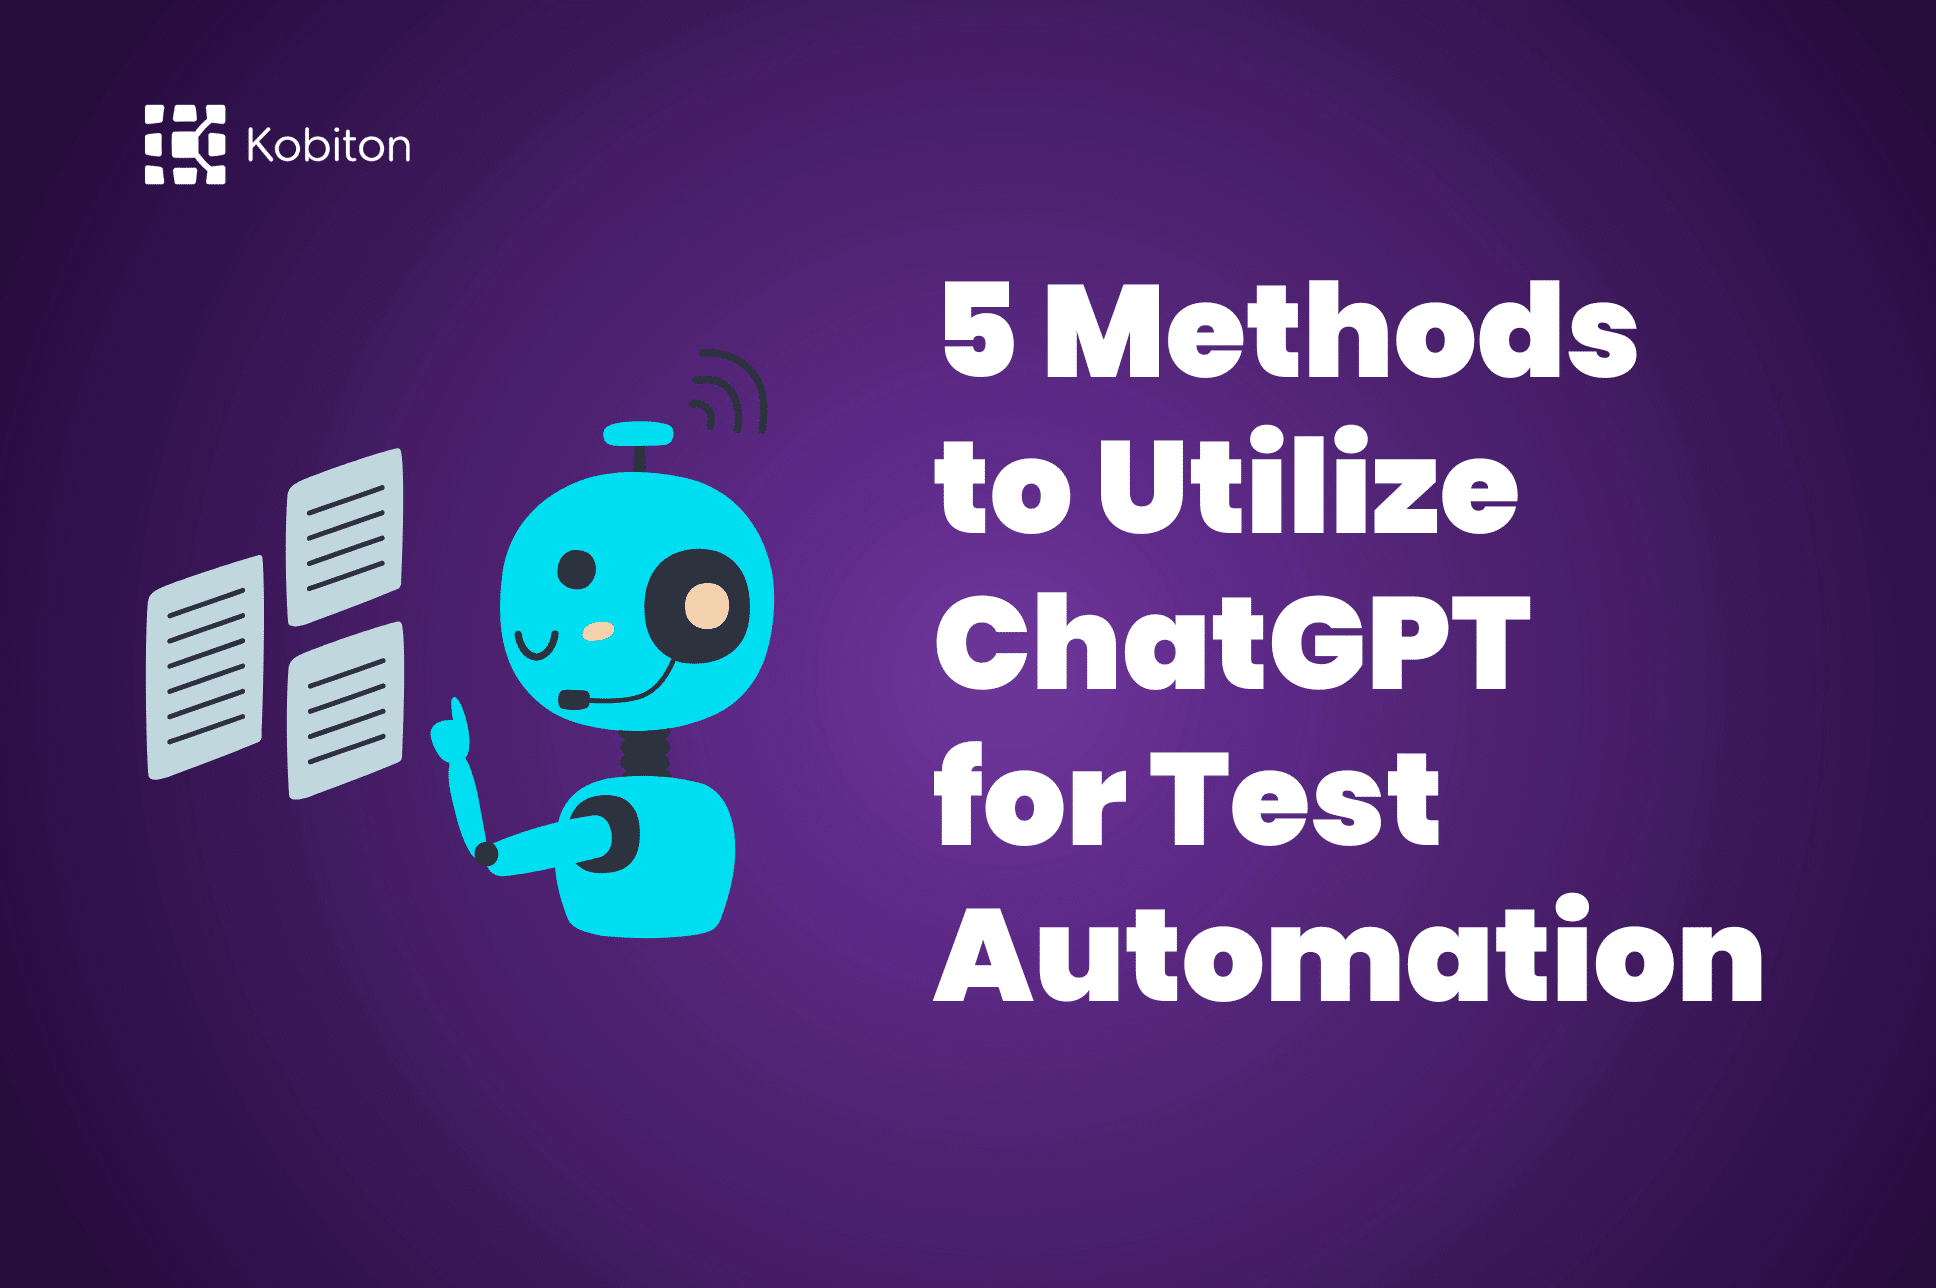 5 Methods to Utilize ChatGPT for Test Automation